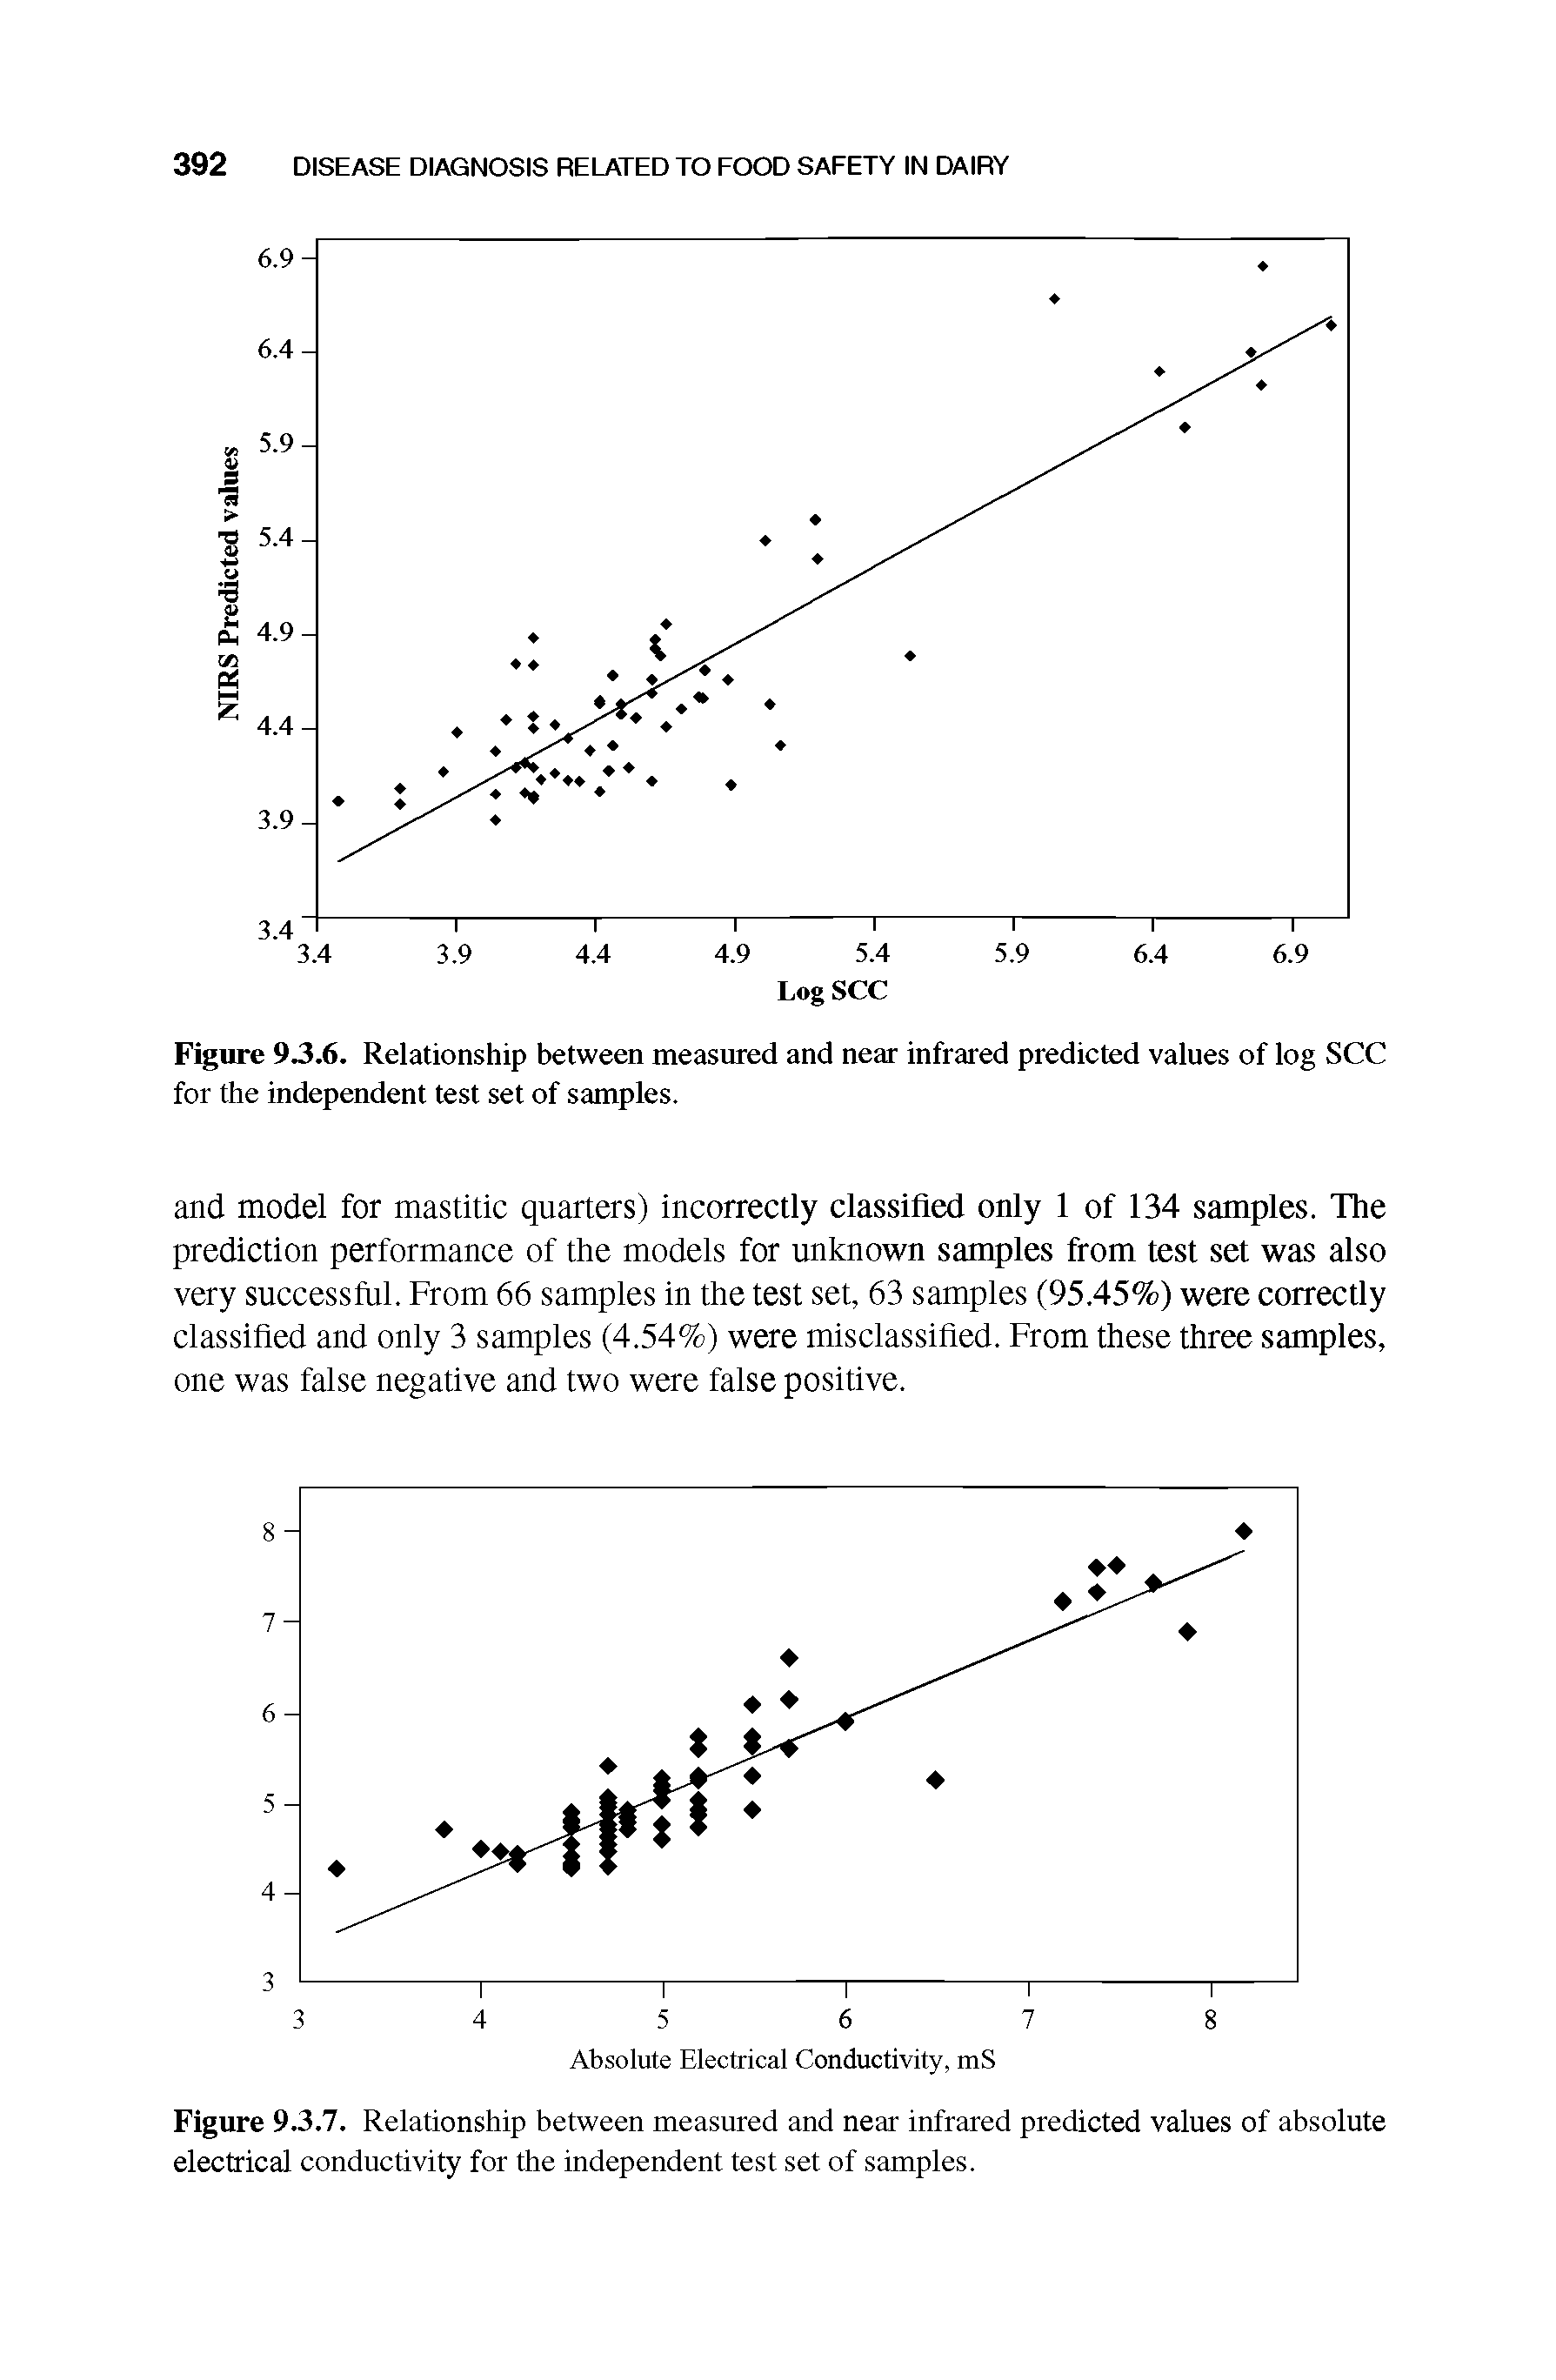 Figure 93.6. Relationship between measured and near infrared predicted values of log SCC for the independent test set of samples.